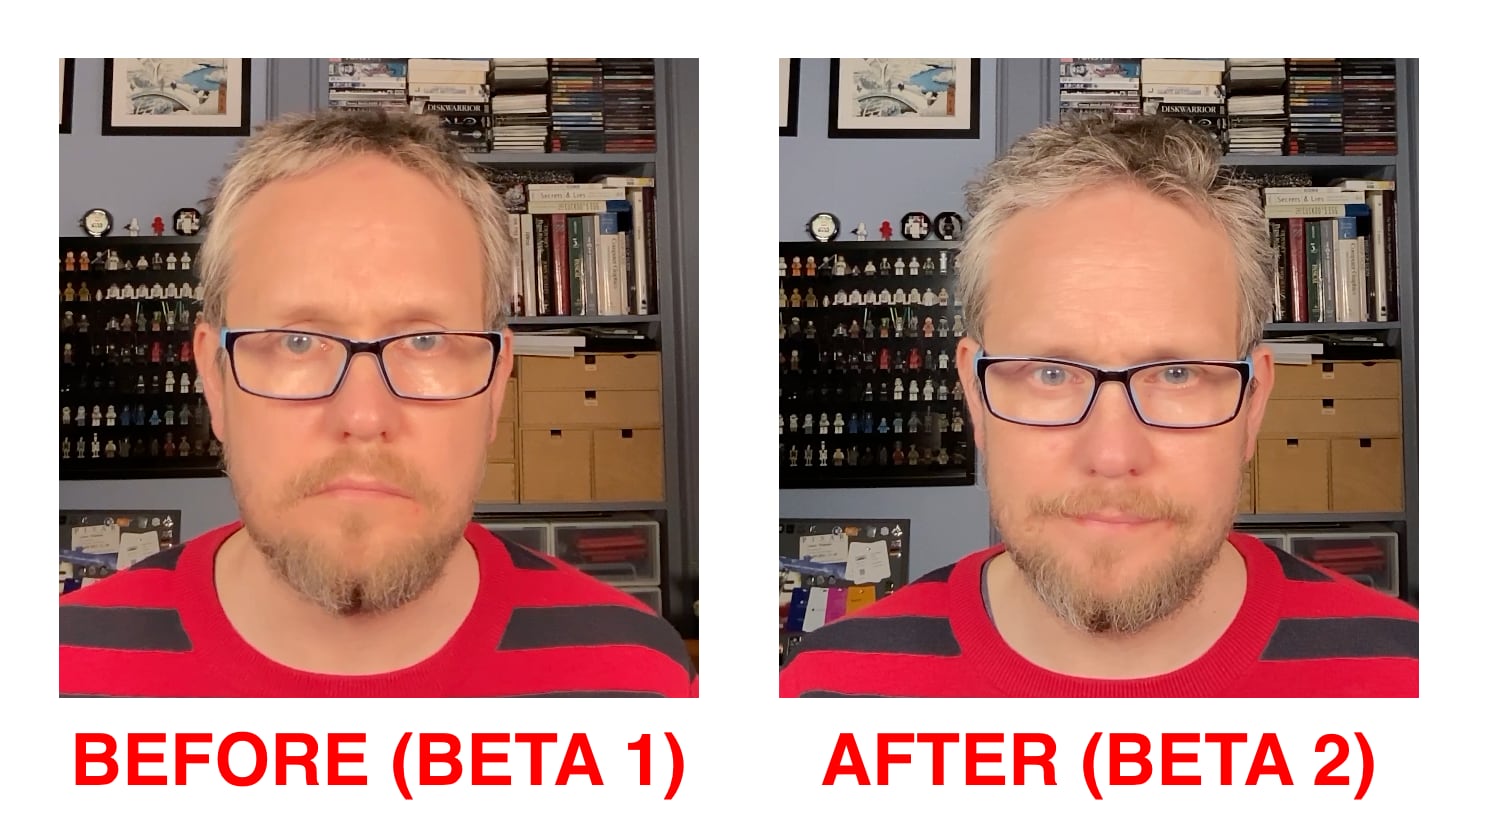 A side-by-side comparison of webcam image quality between Studio Display firmwares